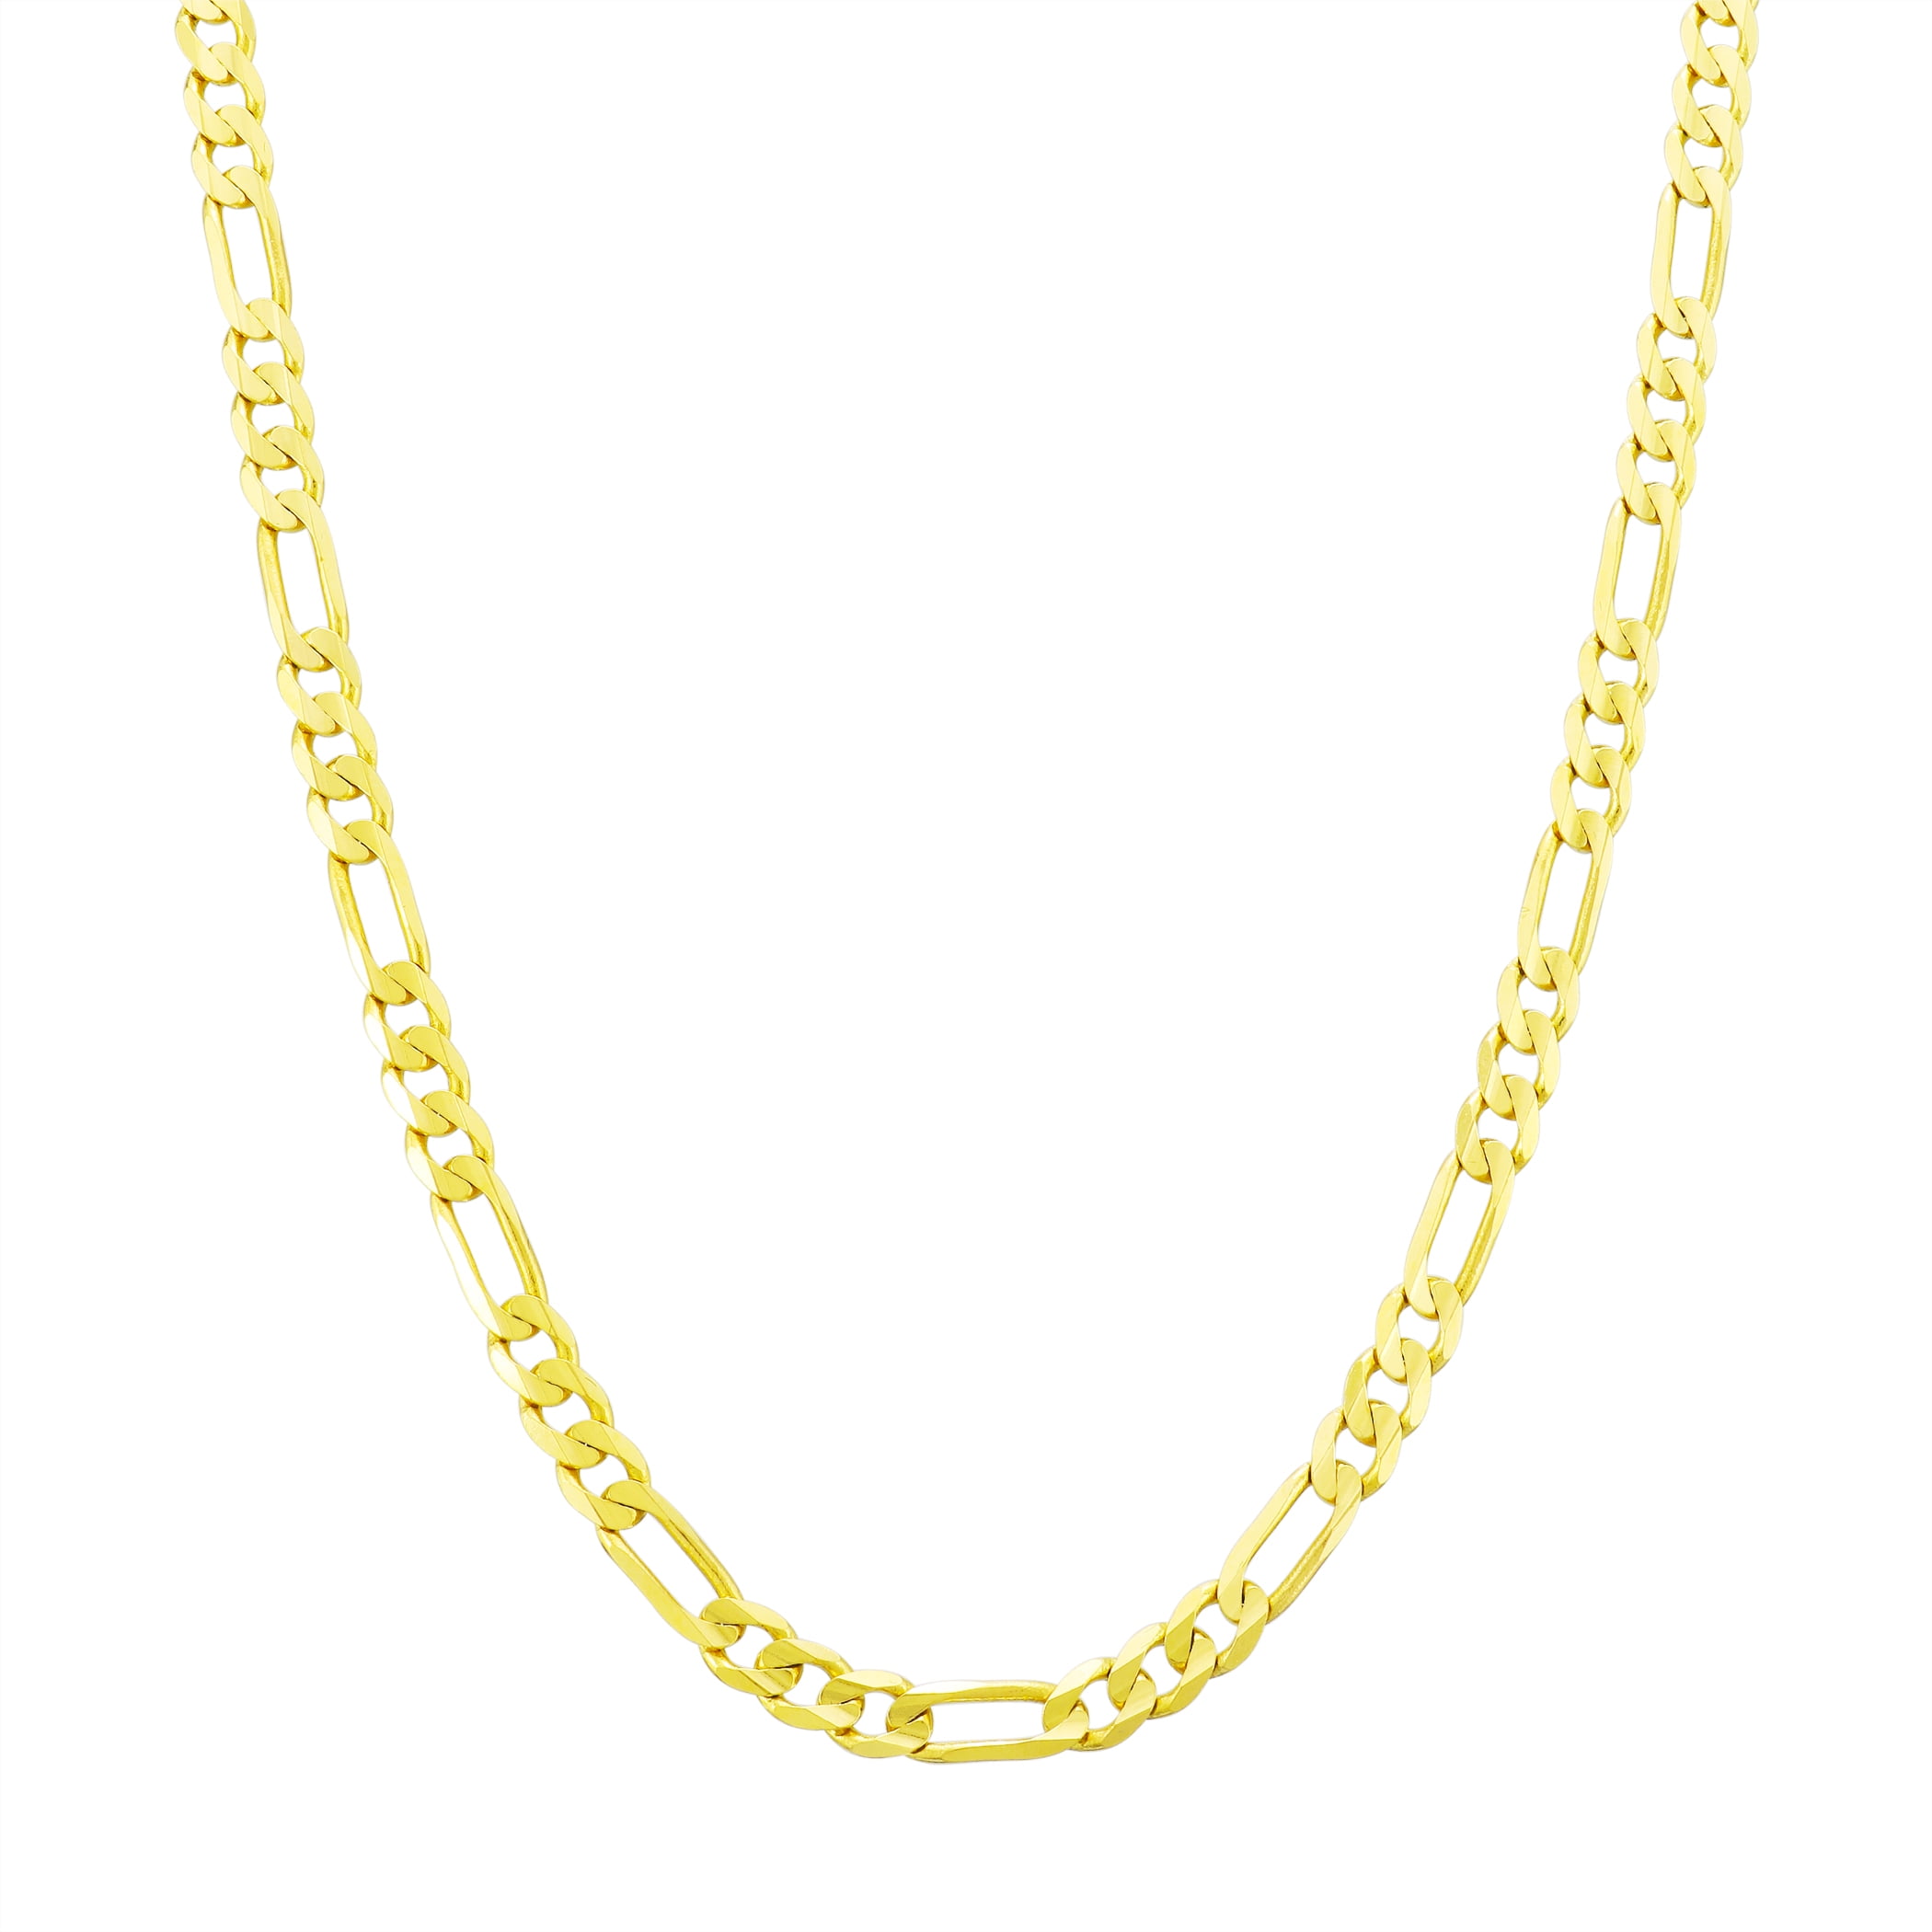 Details about   Authentic 10k Yellow Solid Gold Rolo Chain Necklace 0.7mm 16/18/20/22/24 inches 